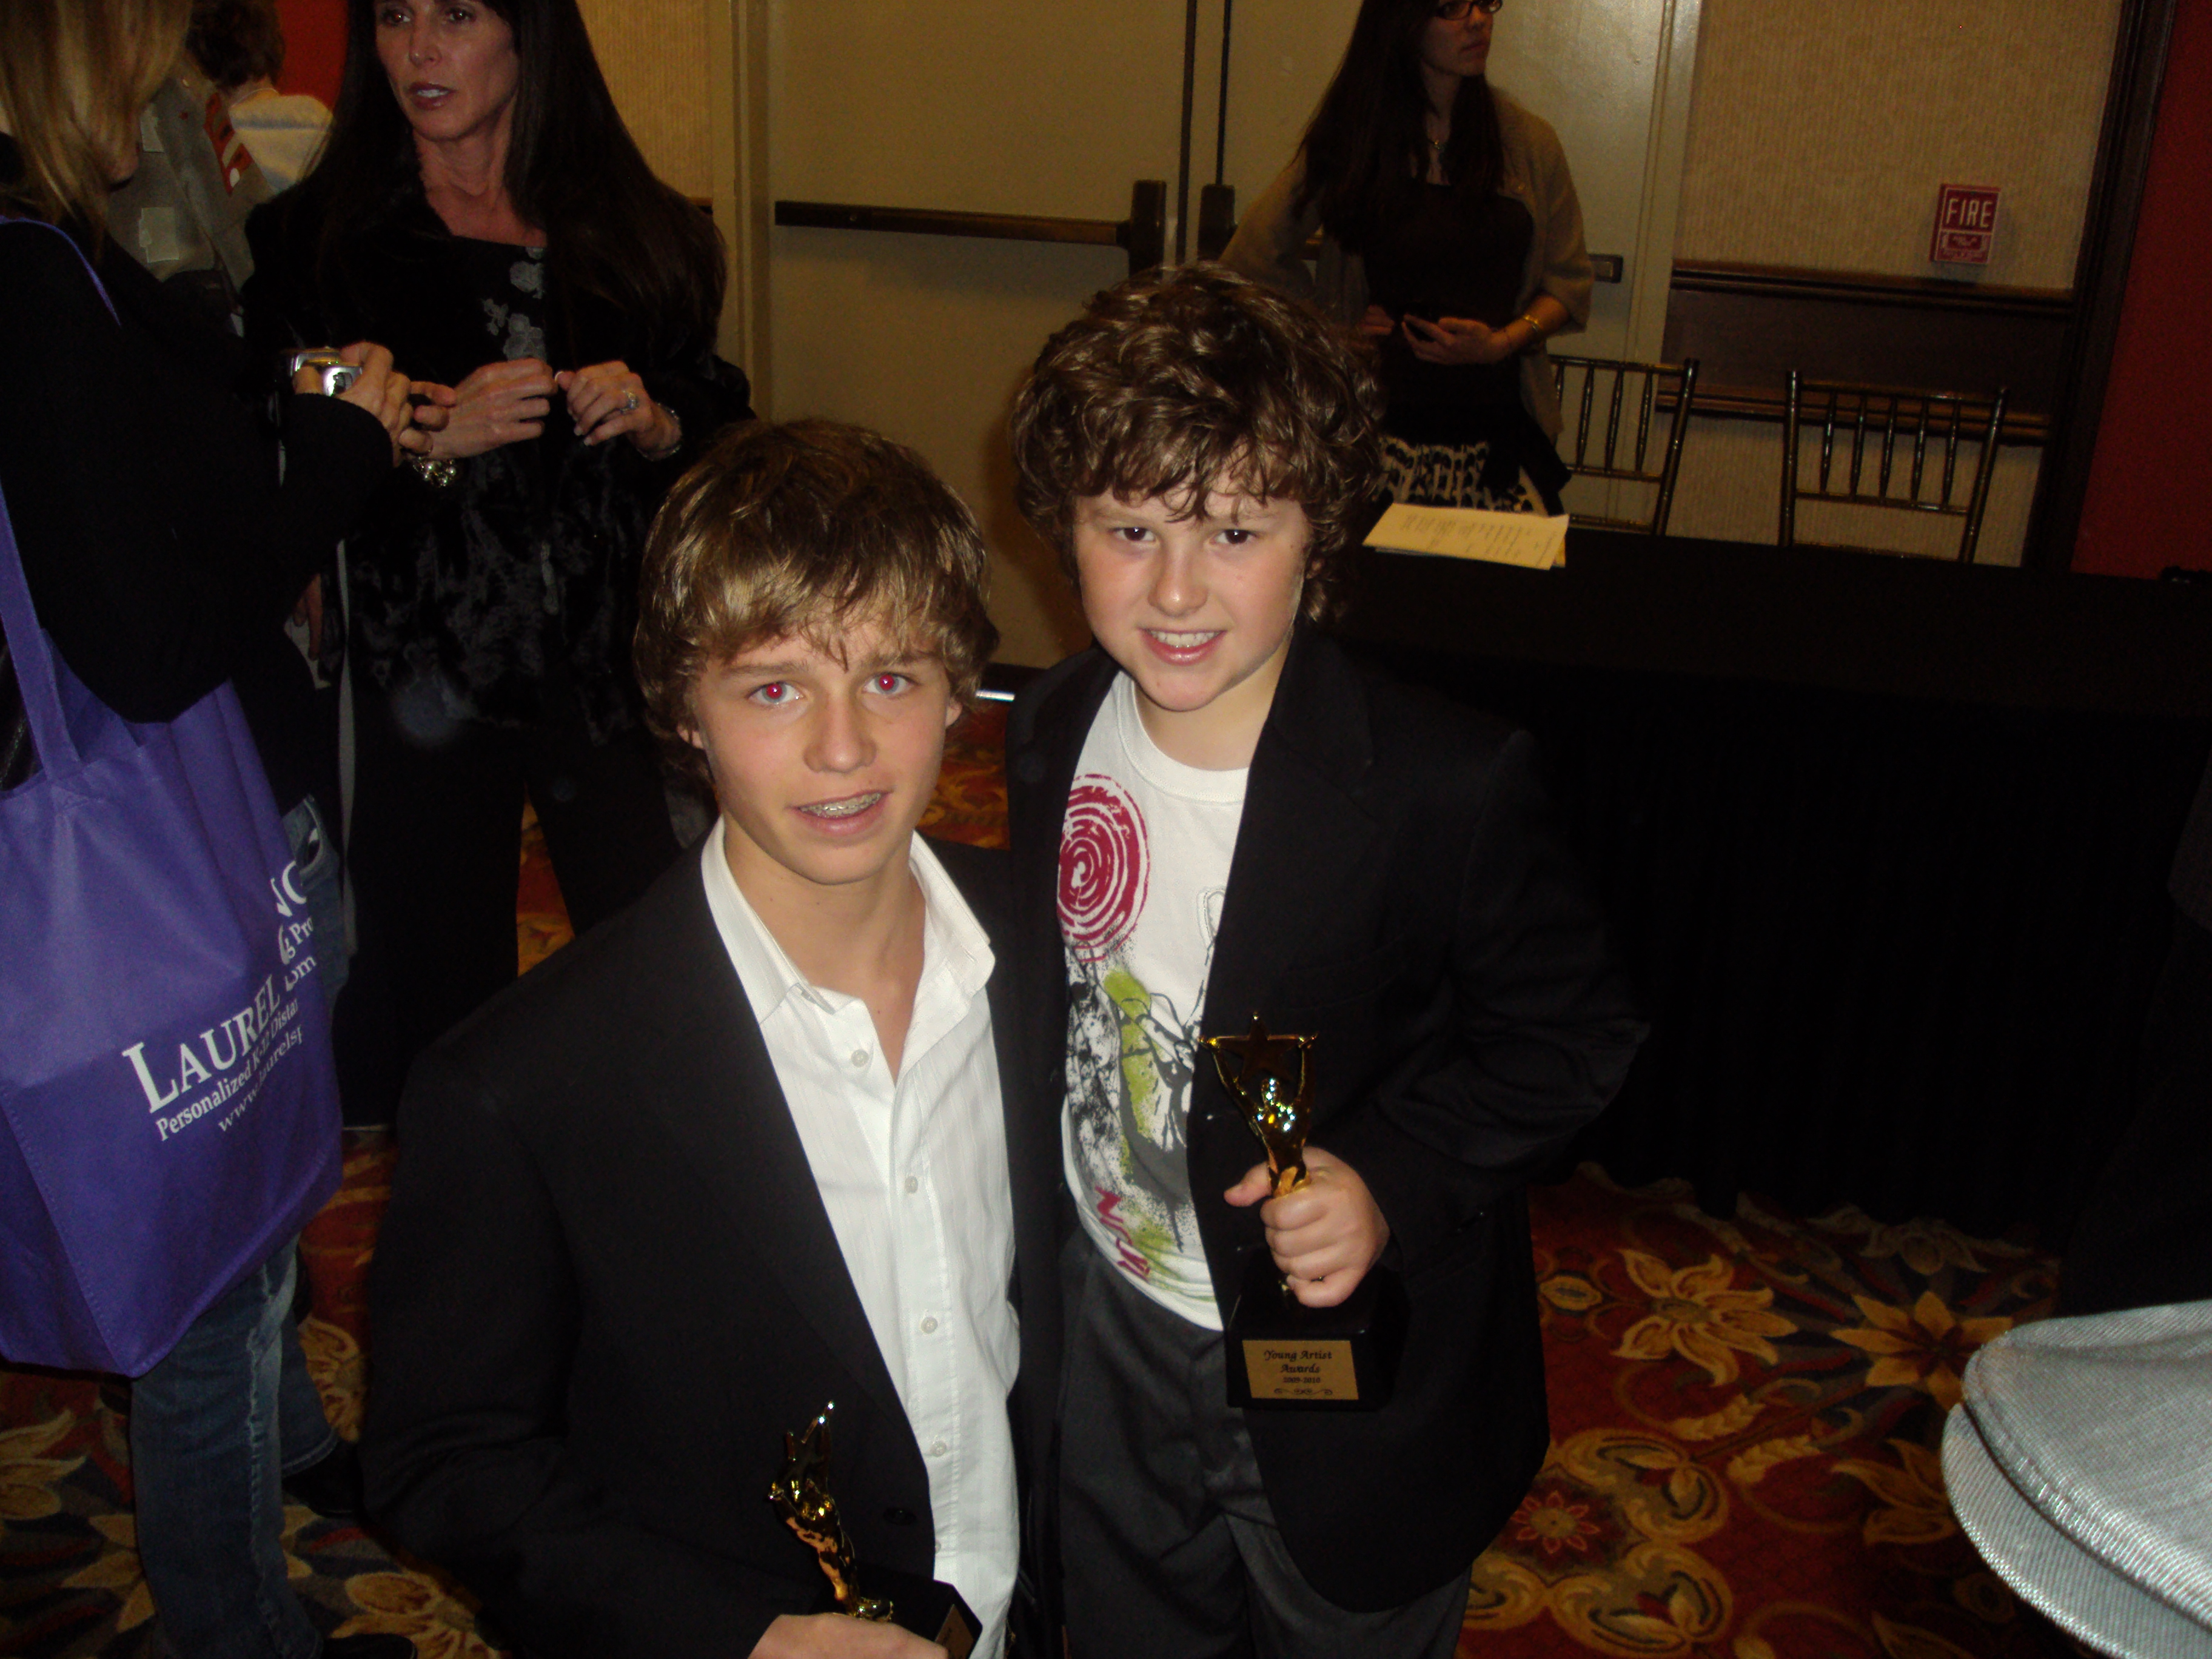 Ty Wood & Nolan Gould at The Young Artist Awards 2010.